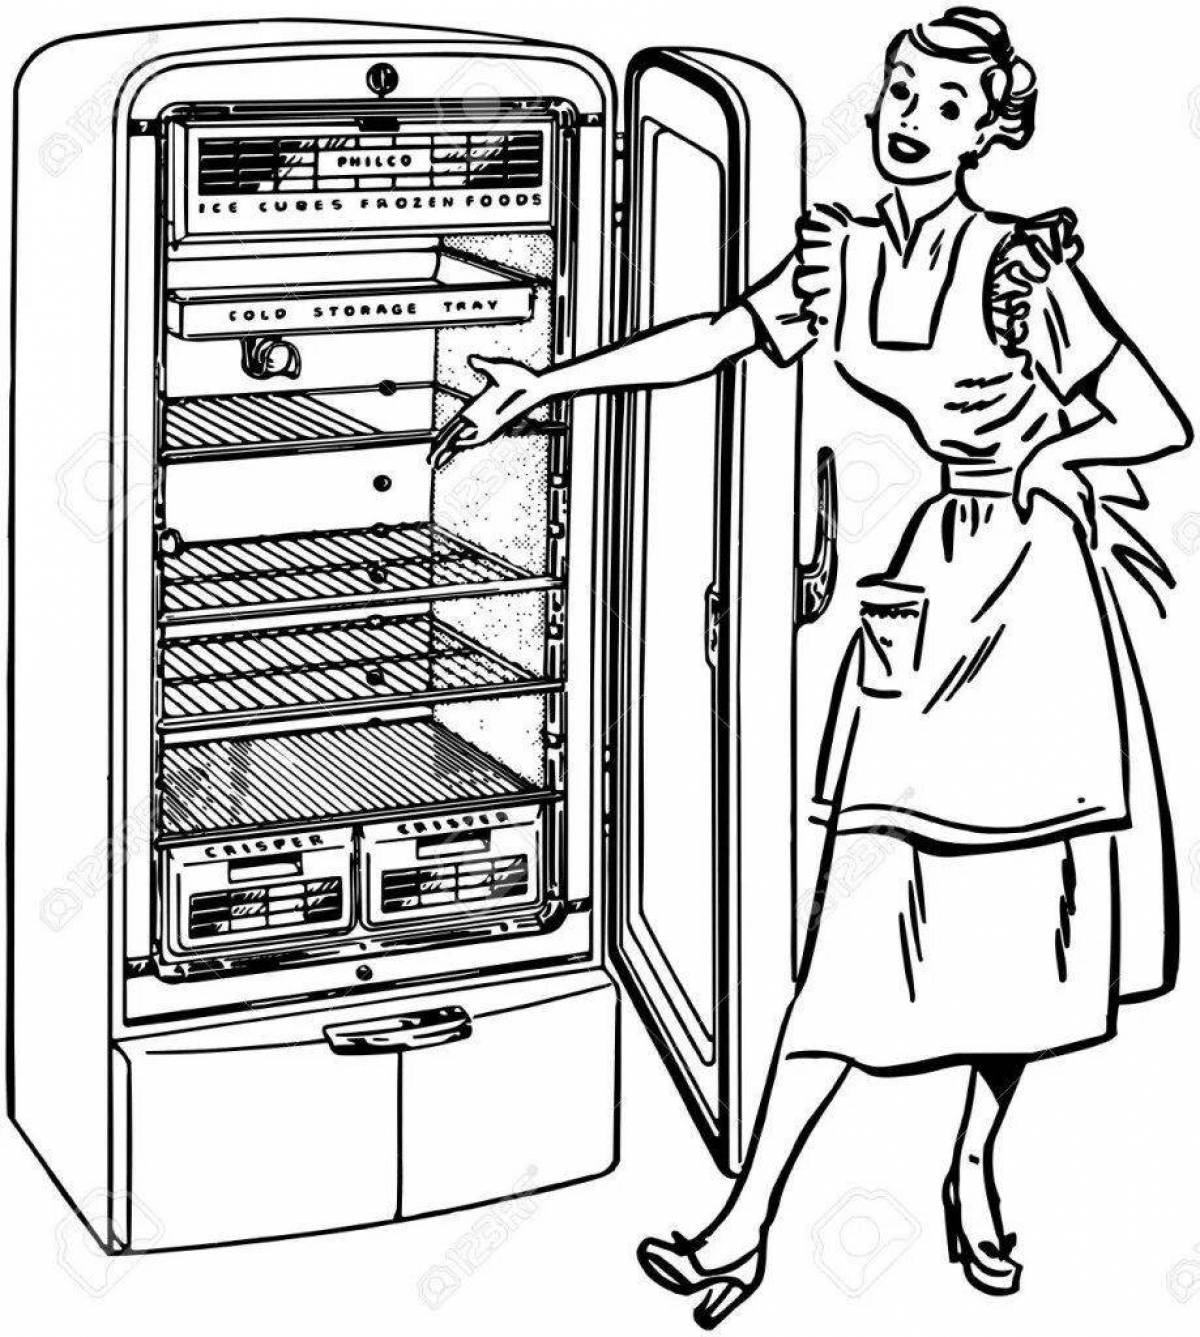 Incredible refrigerator open coloring page